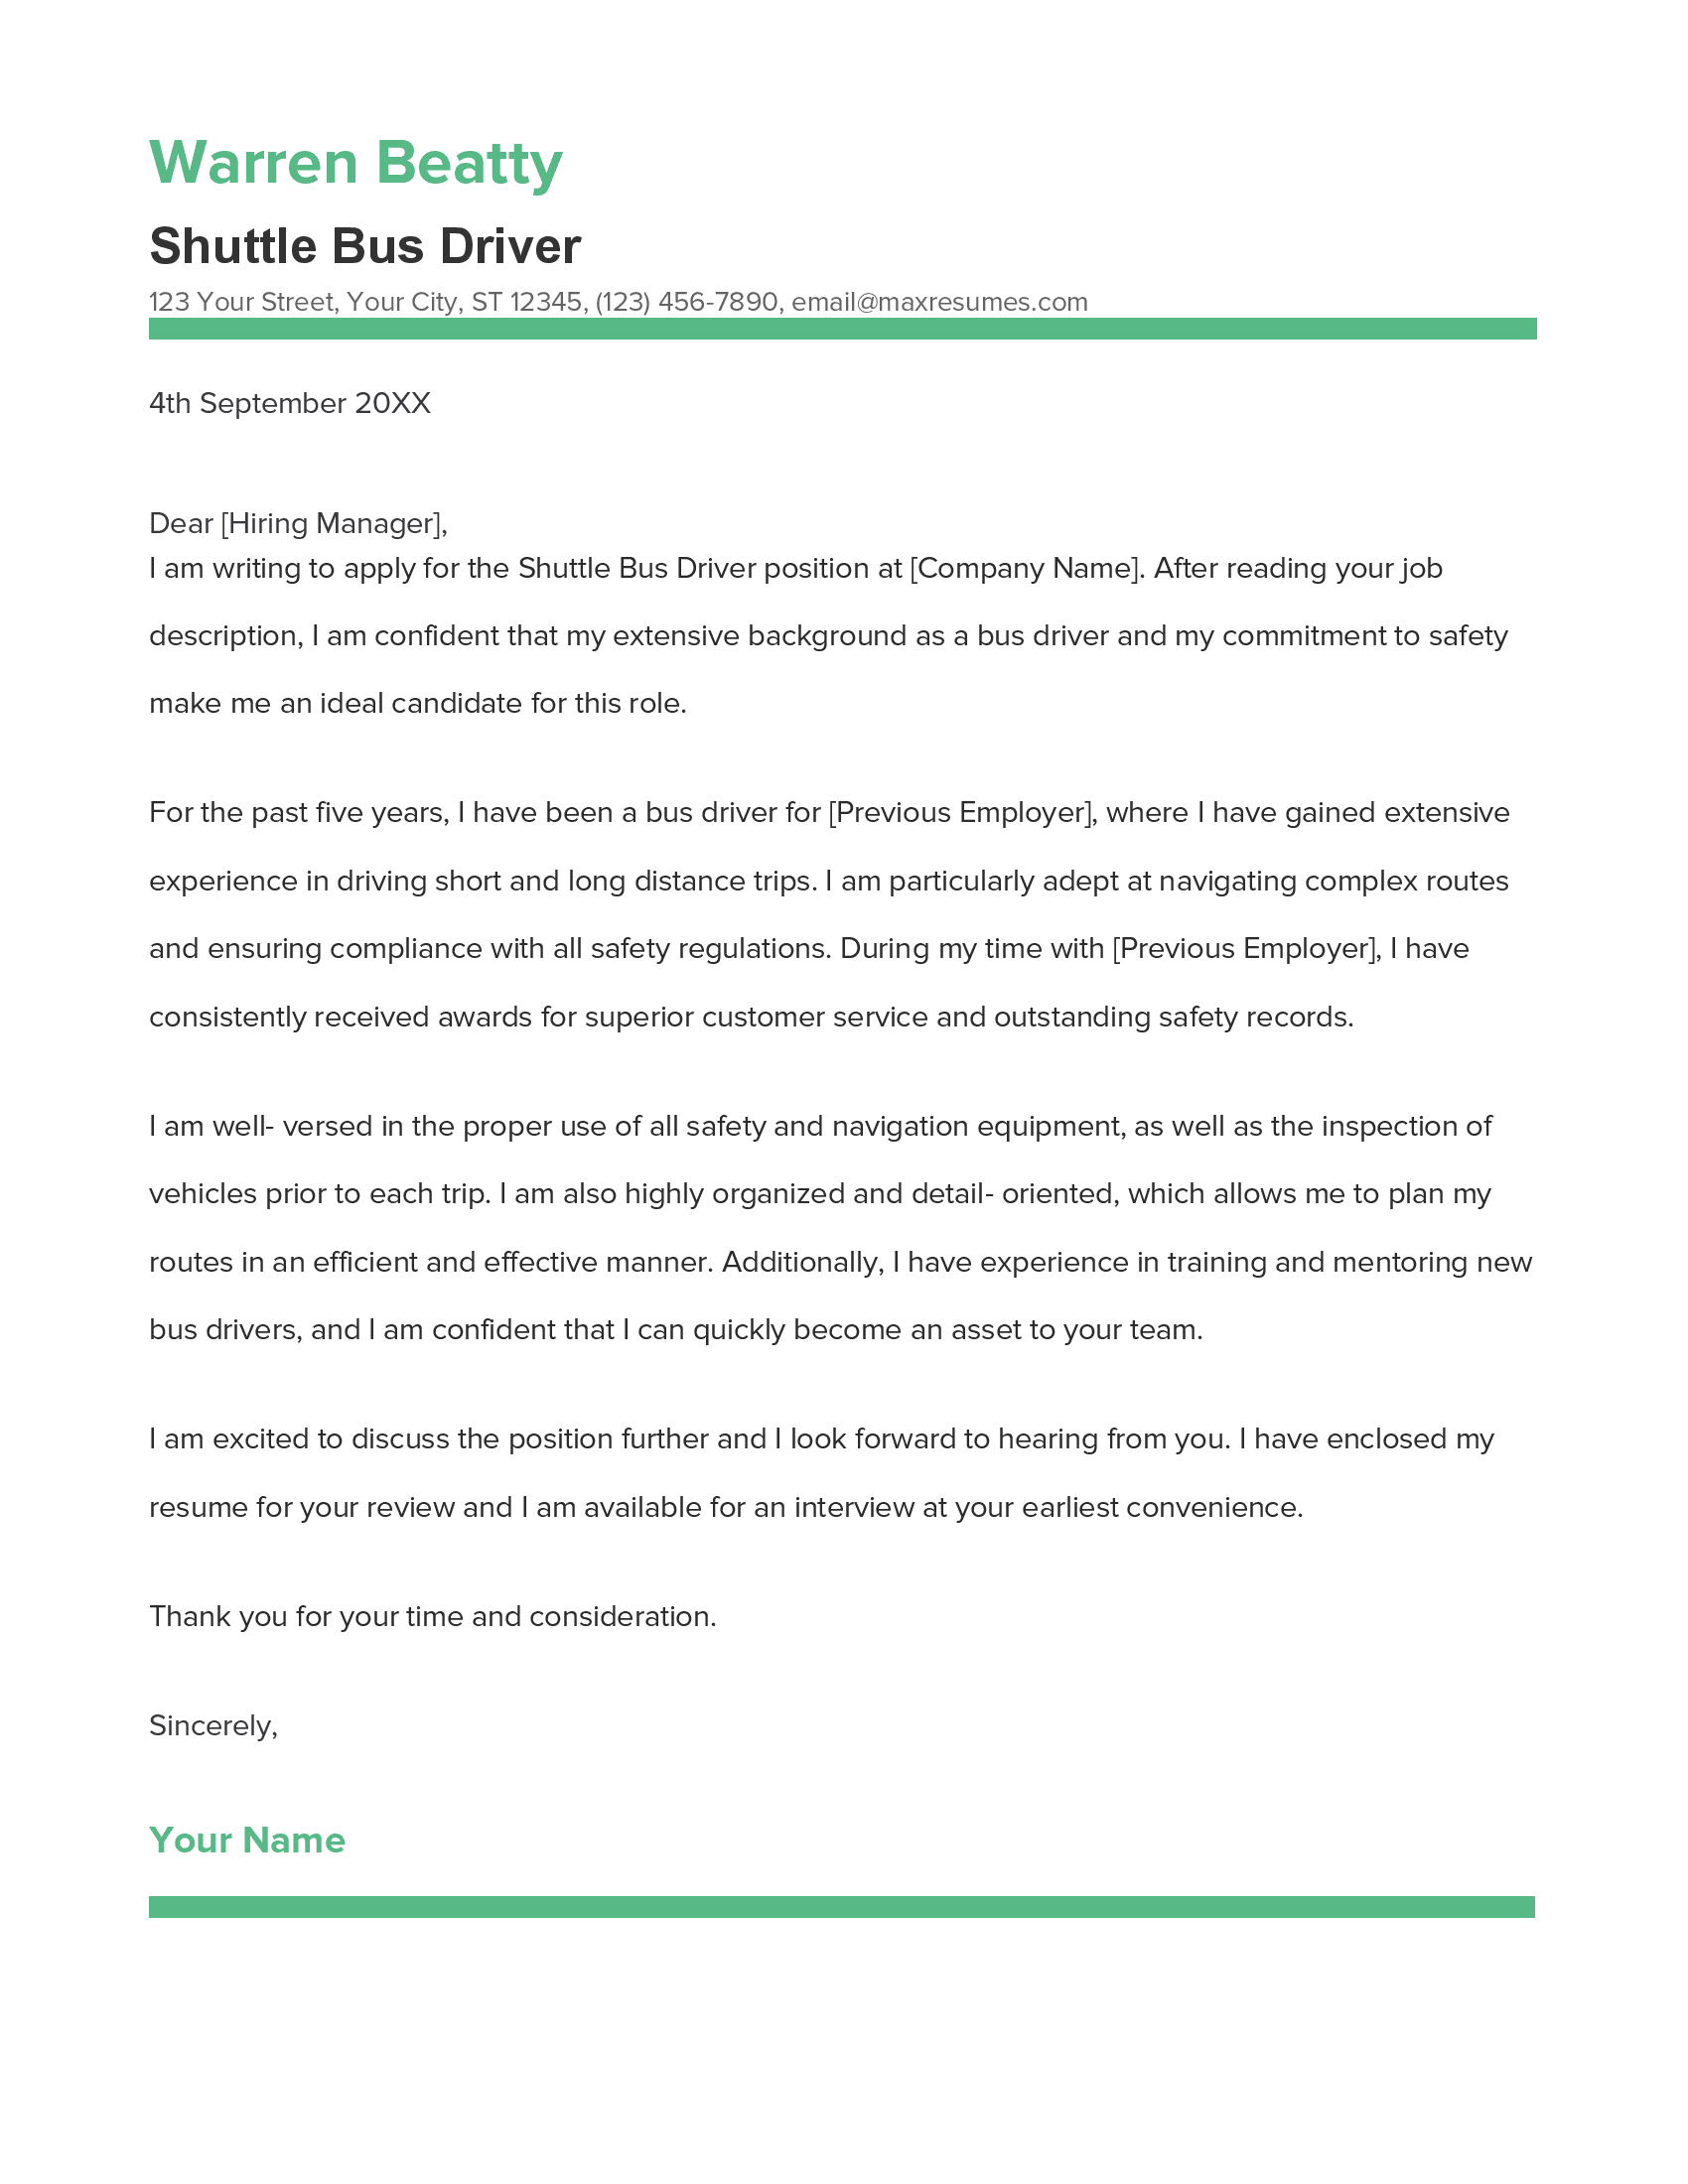 Shuttle Bus Driver Cover Letter Example